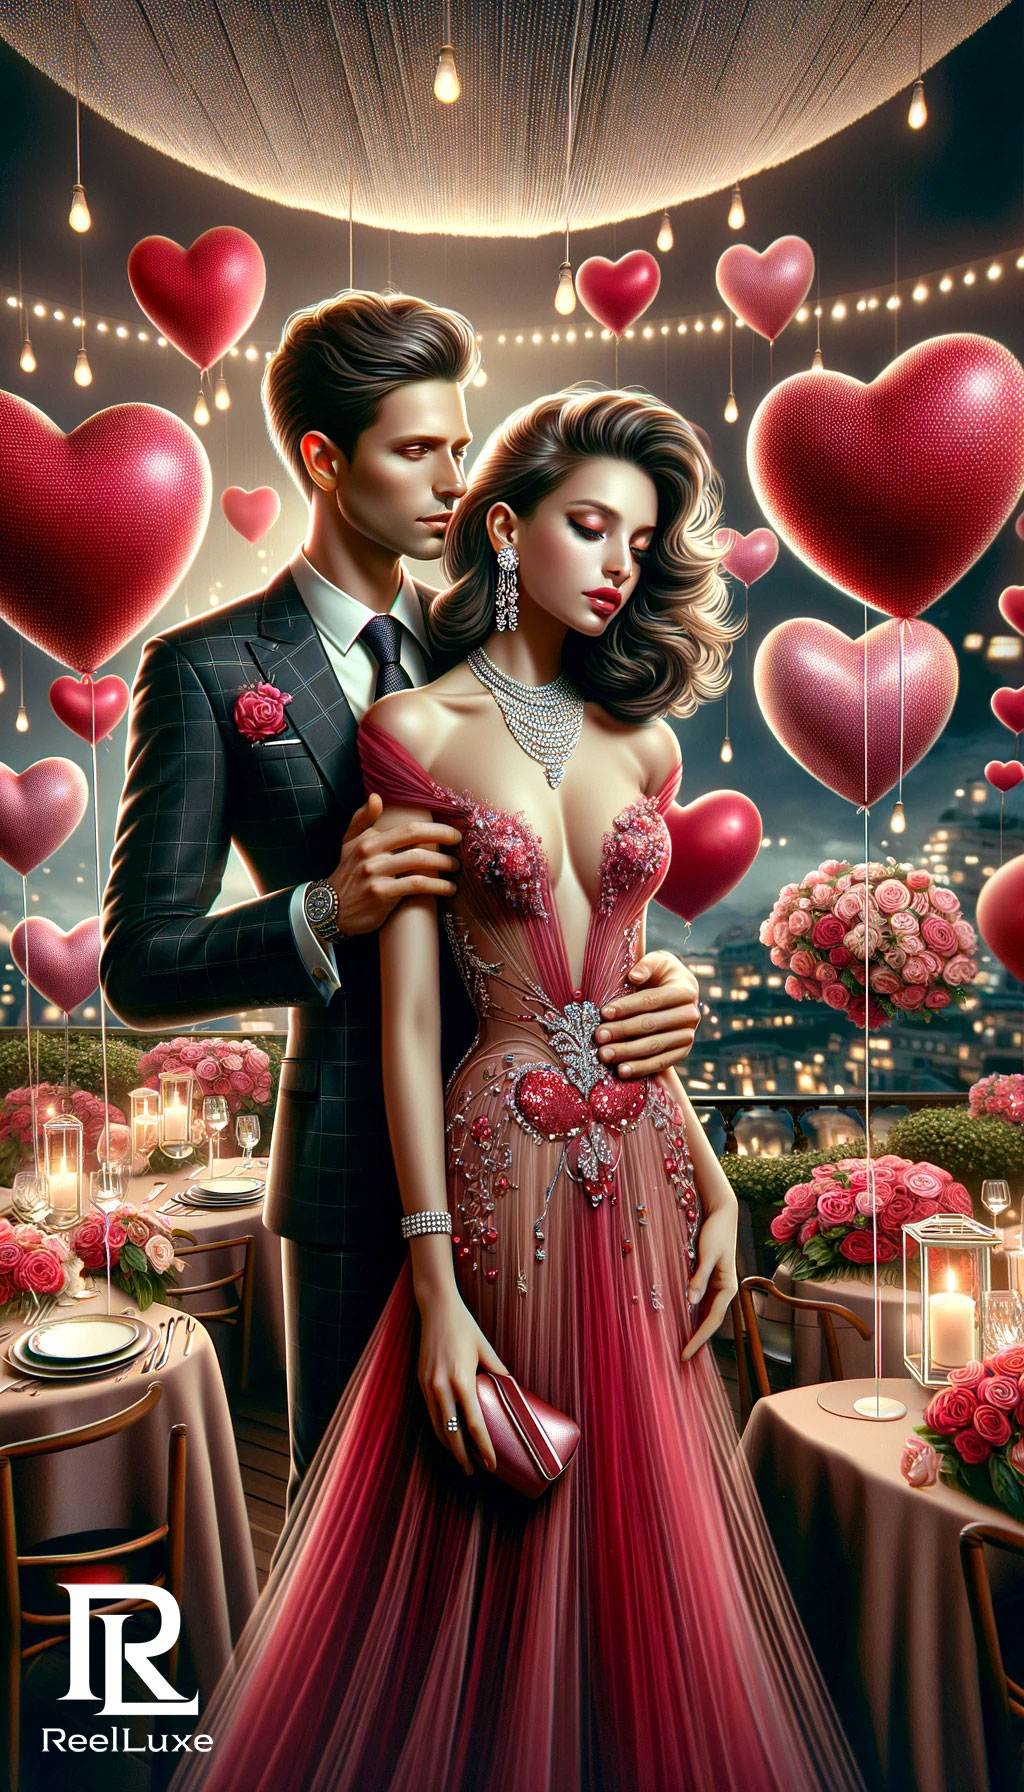 Romance in the Air - Valentine's Day - Beauty and Fashion - Dinner Date - 2